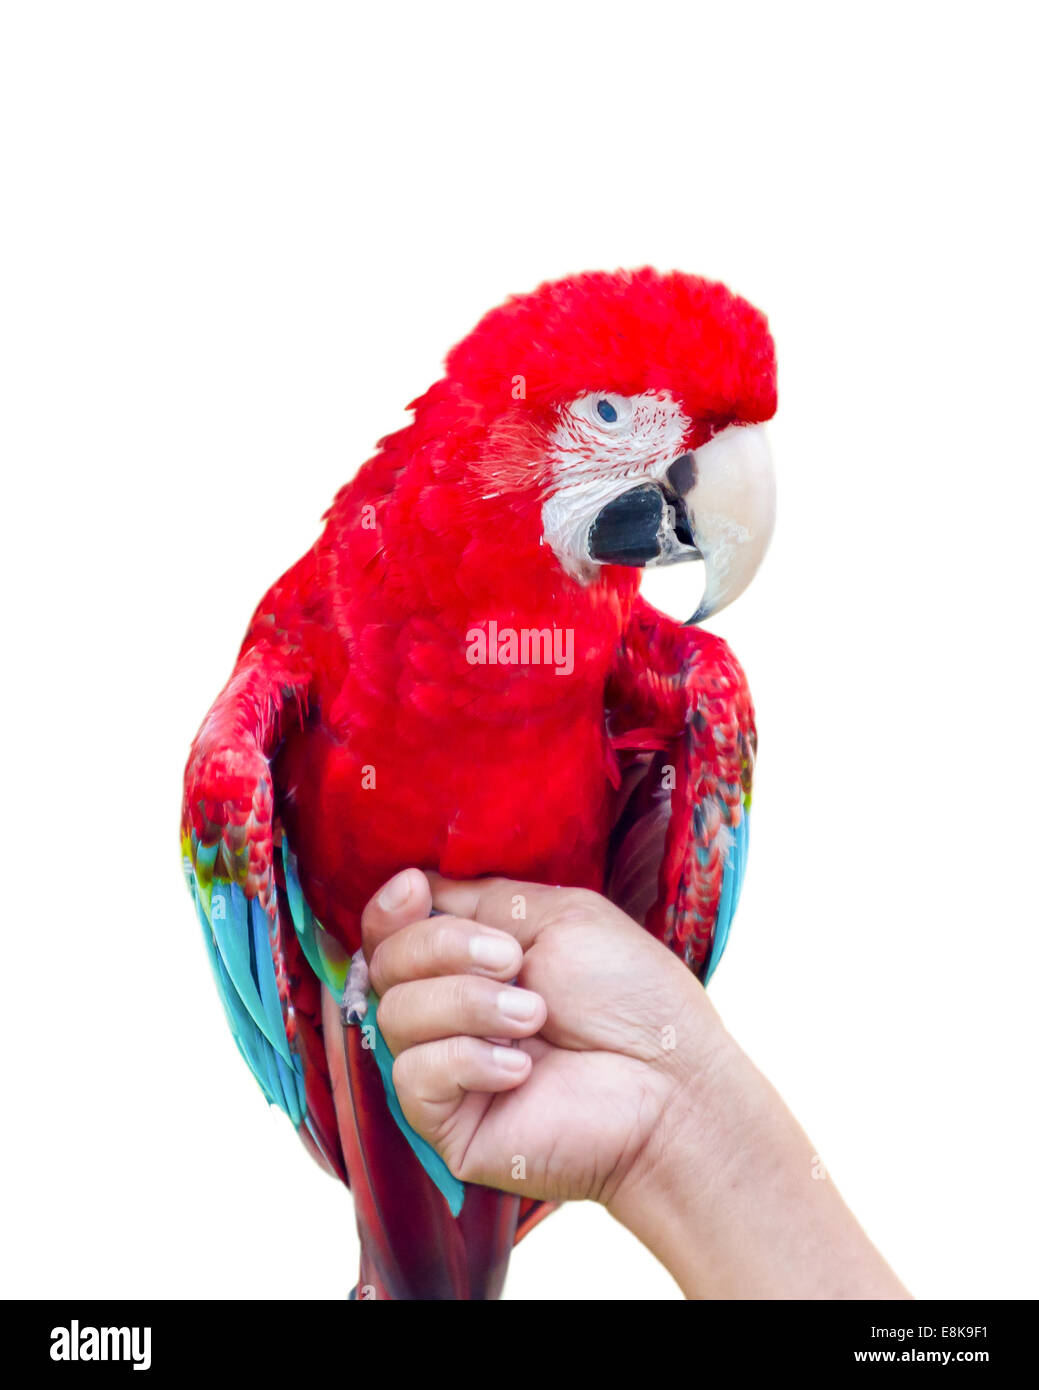 Green-Winged Macaw scientific name Ara chloroptera perch at hand on white background Stock Photo